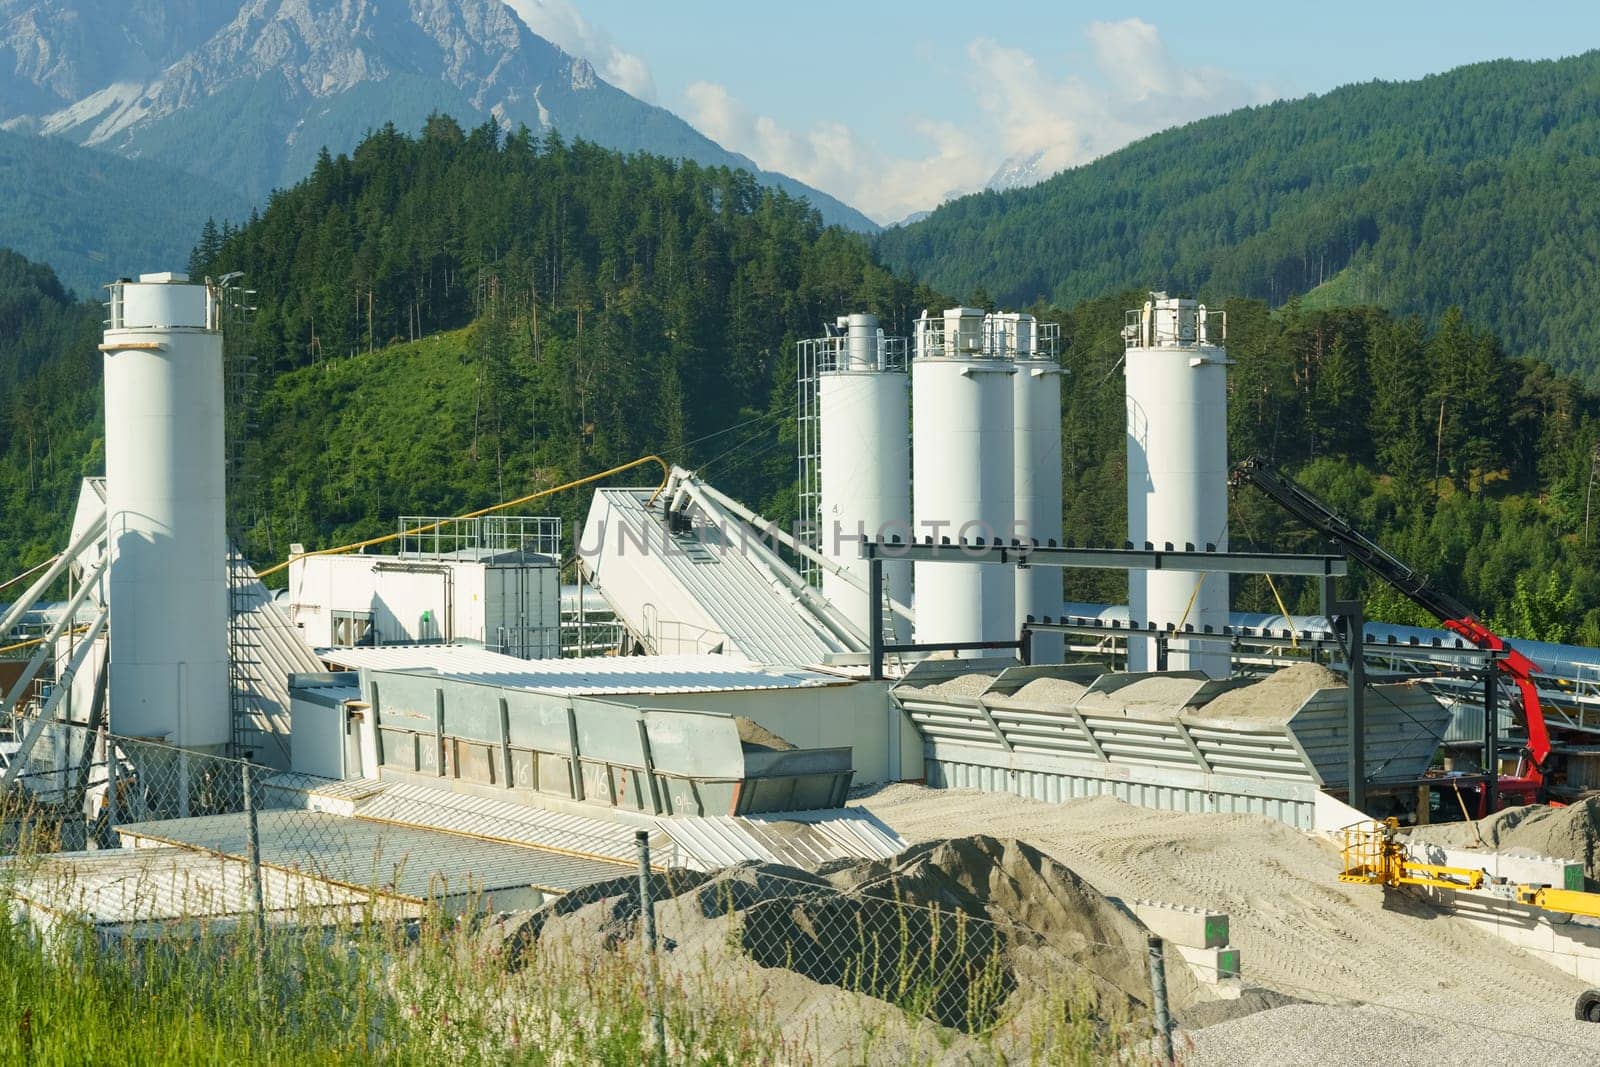 A busy cement factory with towering silos set against a backdrop of lush mountains, conveying large-scale industrial activity in a natural setting.